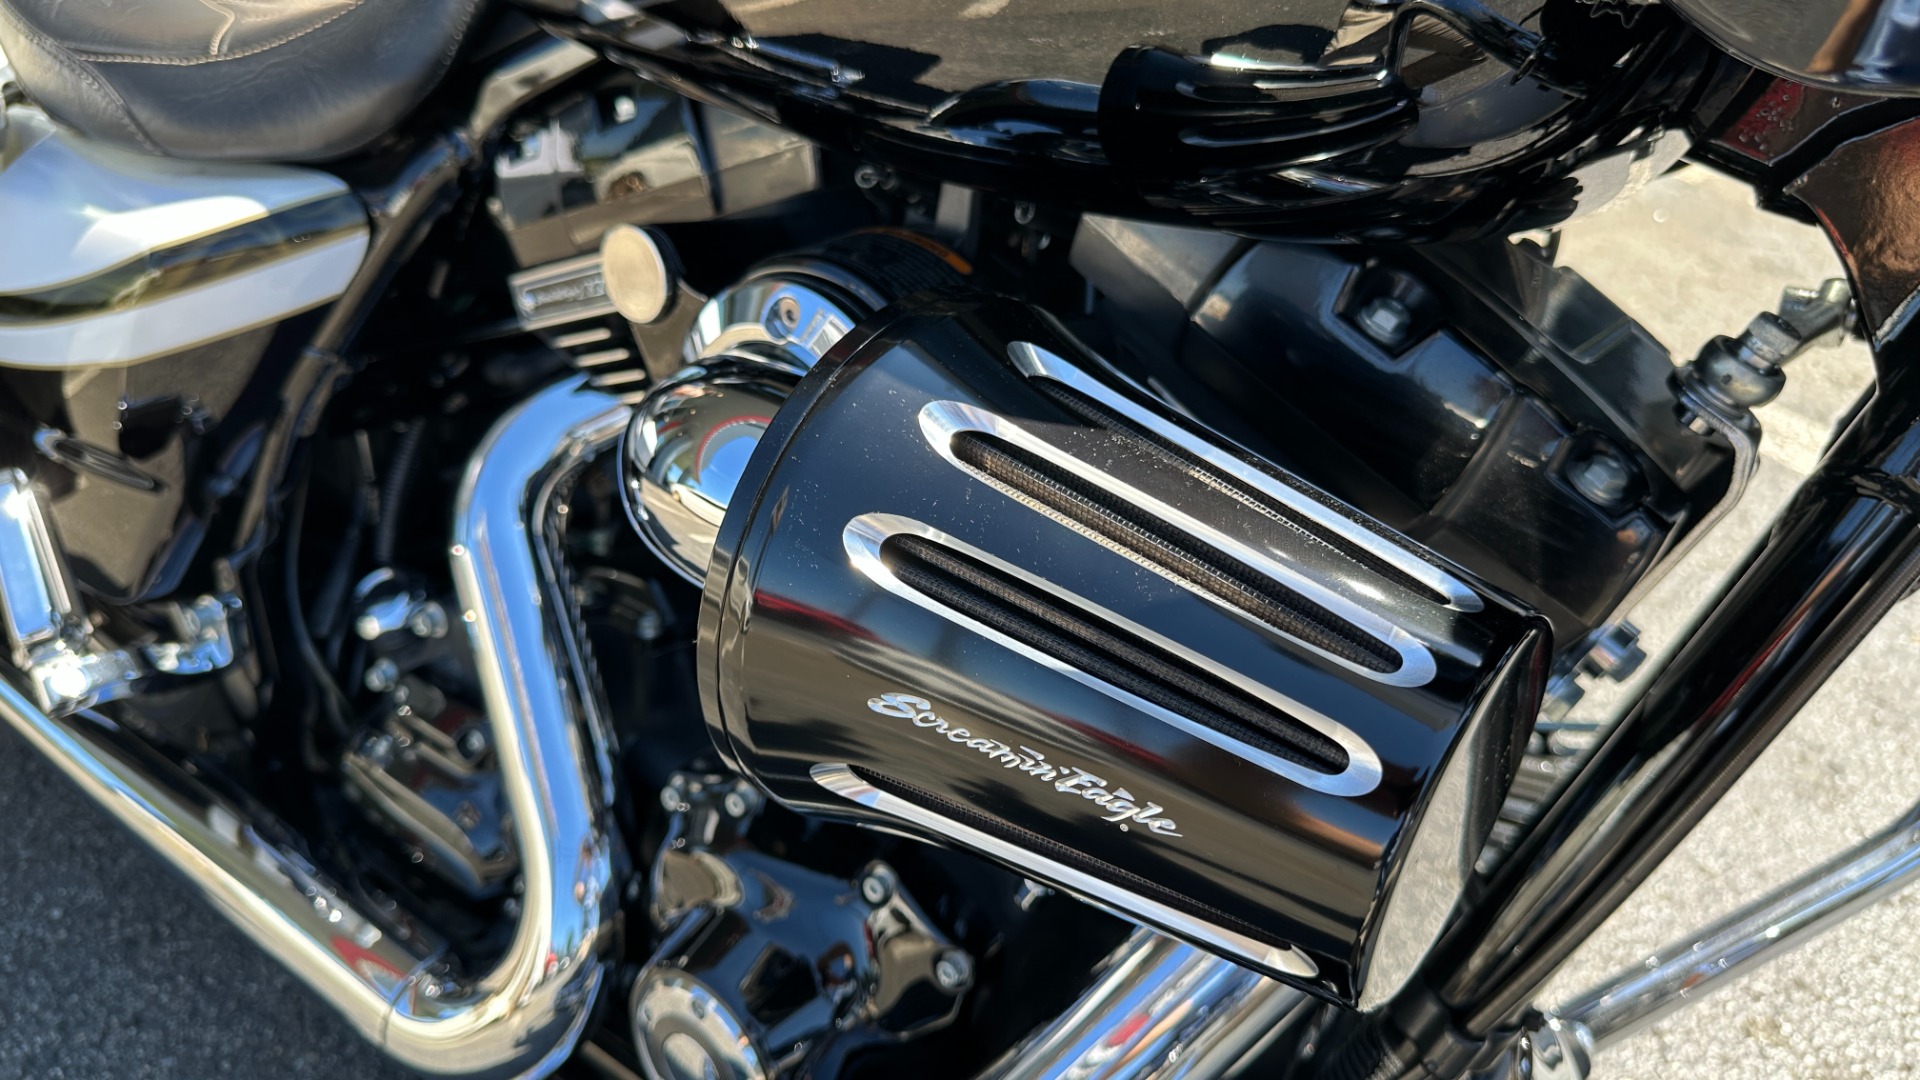 Used 2012 Harley Davidson FLTRXSE CVO Road Glide Custom CVO PAINT / RINEHART EXHAUST / SCREAMING EAGLE 110 ENGINE for sale $32,000 at Formula Imports in Charlotte NC 28227 21